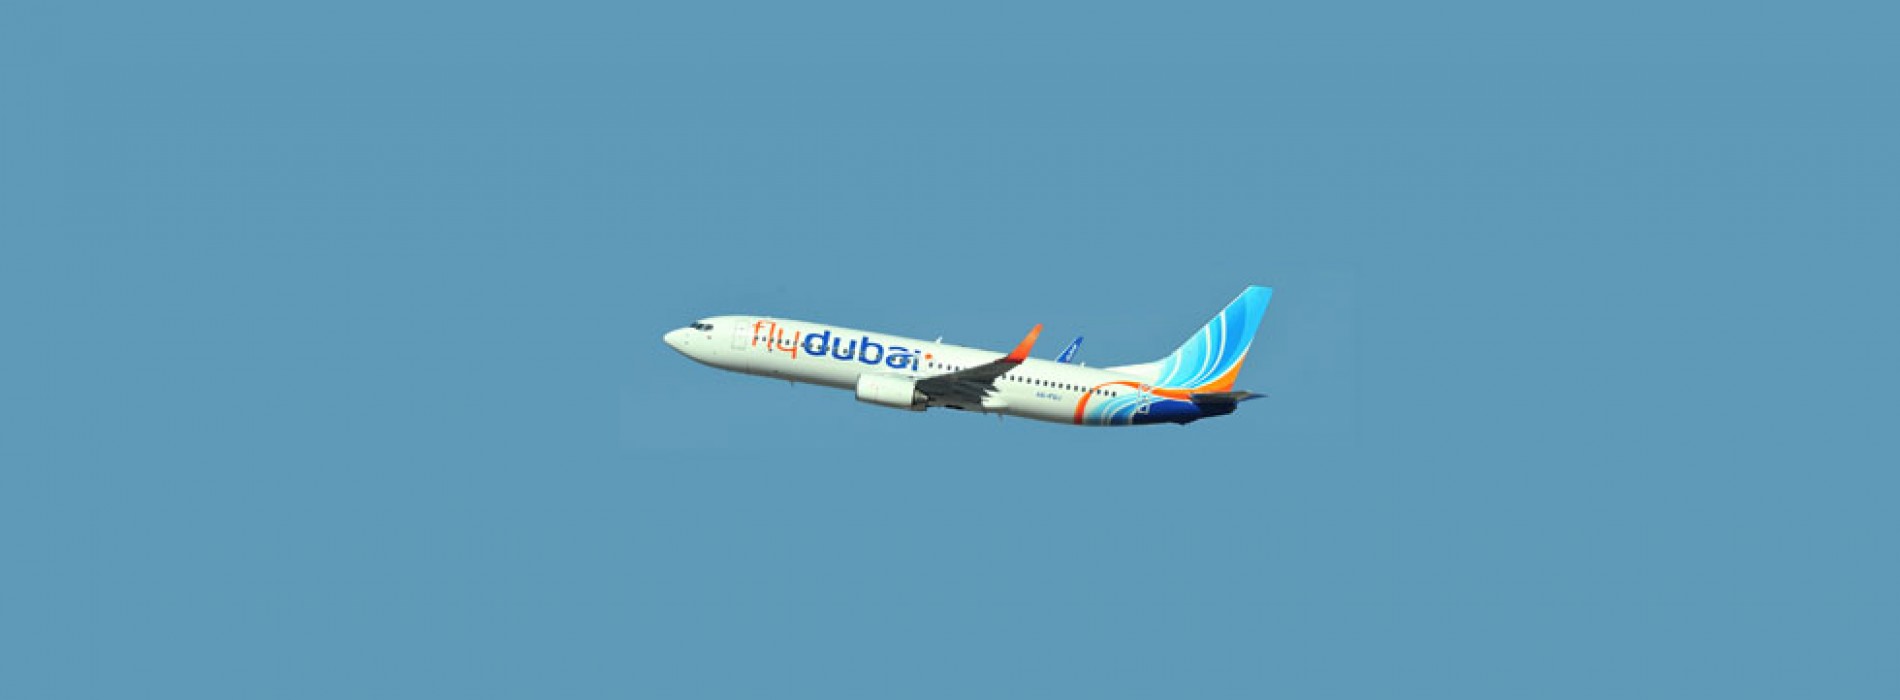 Team FlyBot wins flydubai’s first Air Travel Hackathon by HackMania